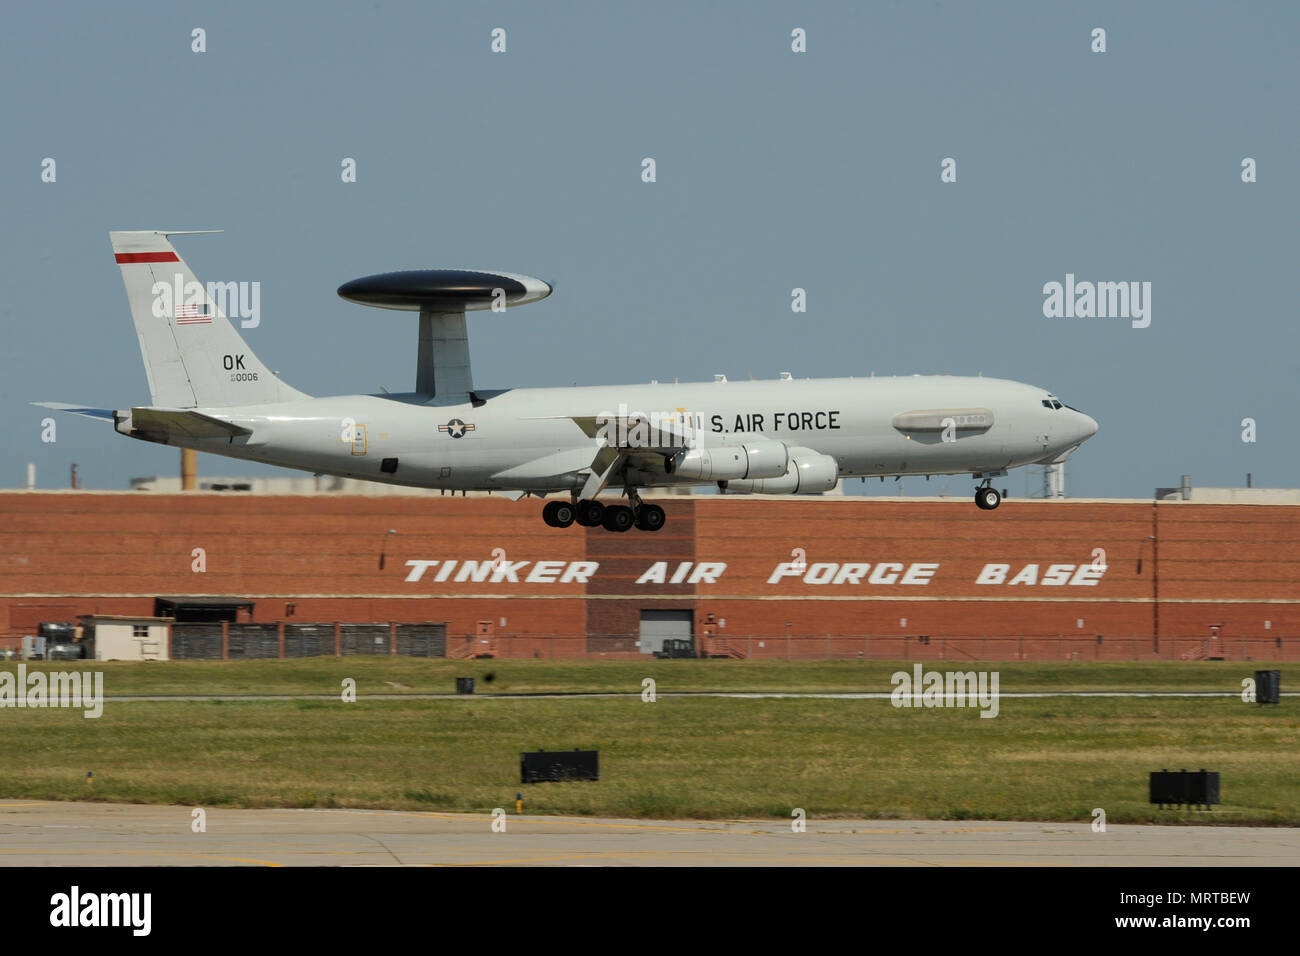 A Boeing E-3G Airborne Warning and Control System aircraft on final approach to land June 16, 2017, Tinker Air Force Base, Oklahoma. The large building behind the E-3 AWACS is building 3001, a former Douglas Aircraft manufacturing plant during World War II, now used by the Oklahoma City Air Logistics Complex and its parent organization the Air Force Sustainment Center. The E-3 is operated by the 552nd Air Control Wing, Air Combat Command, from Tinker AFB where heavy maintenance of the E-3 airframe and engines is also conducted by the OC-ALC. (U.S. Air Force photo/Greg L. Davis) Stock Photo